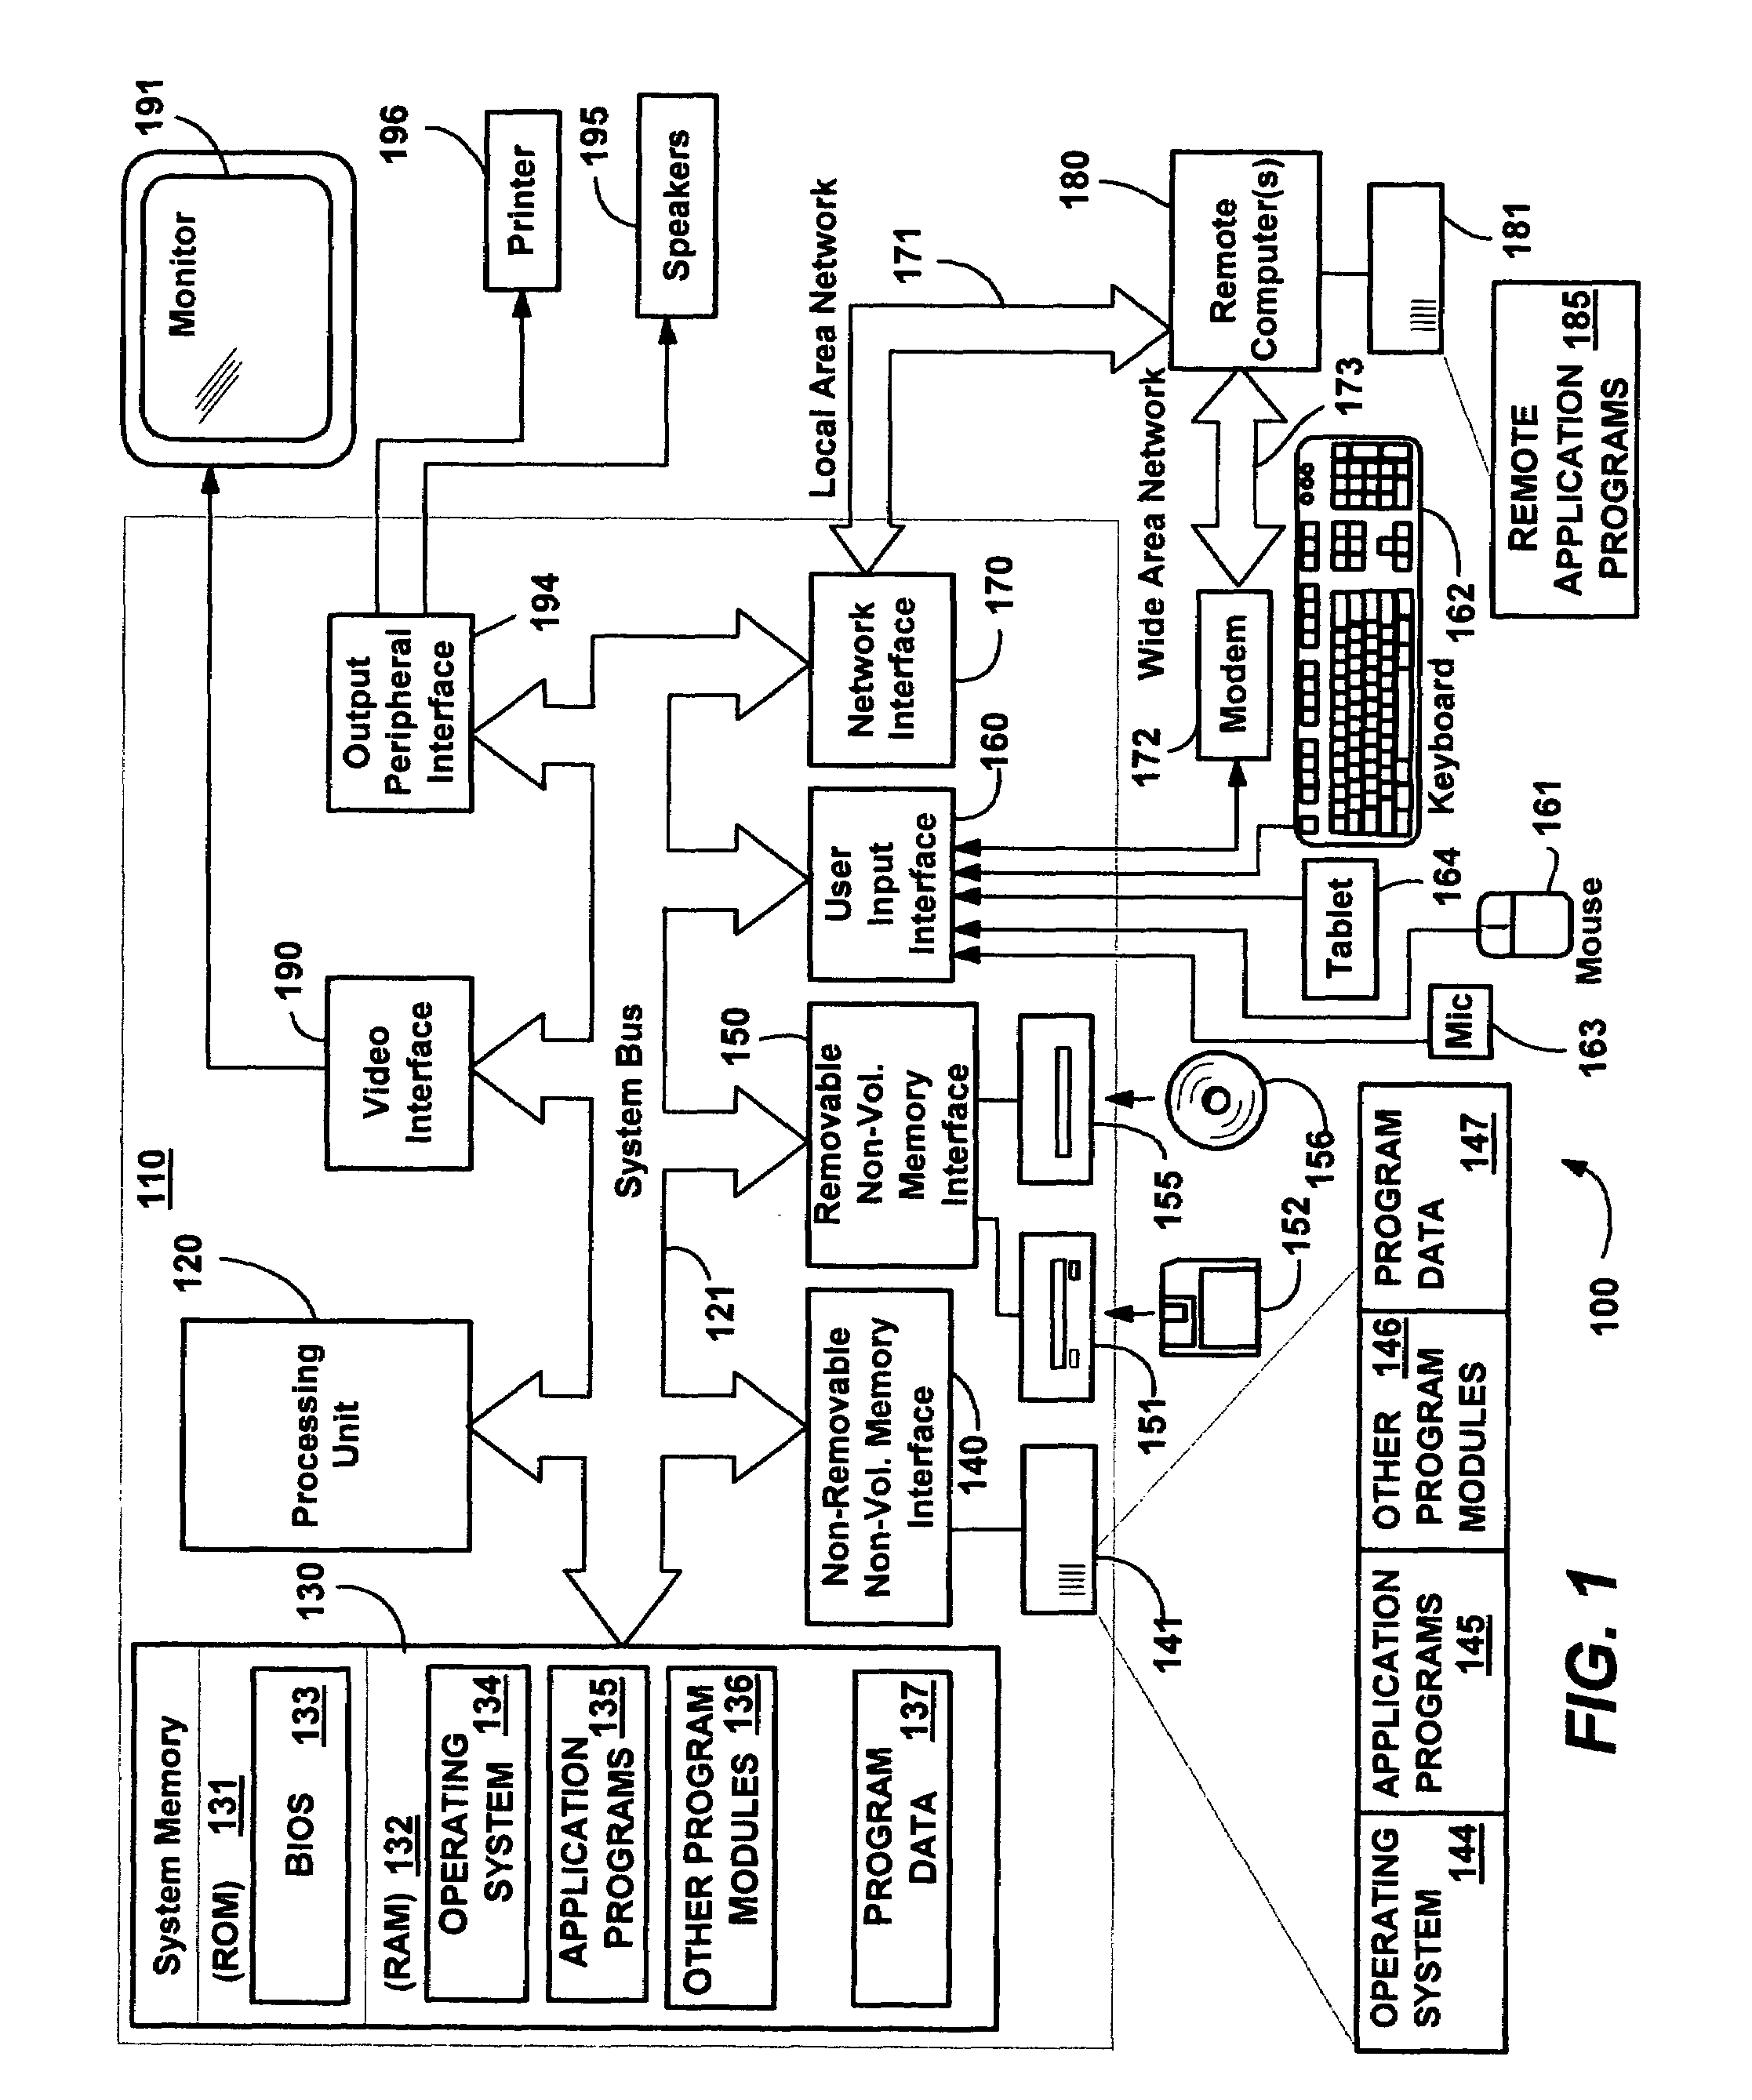 System and method for reporting hierarchically arranged data in markup language formats